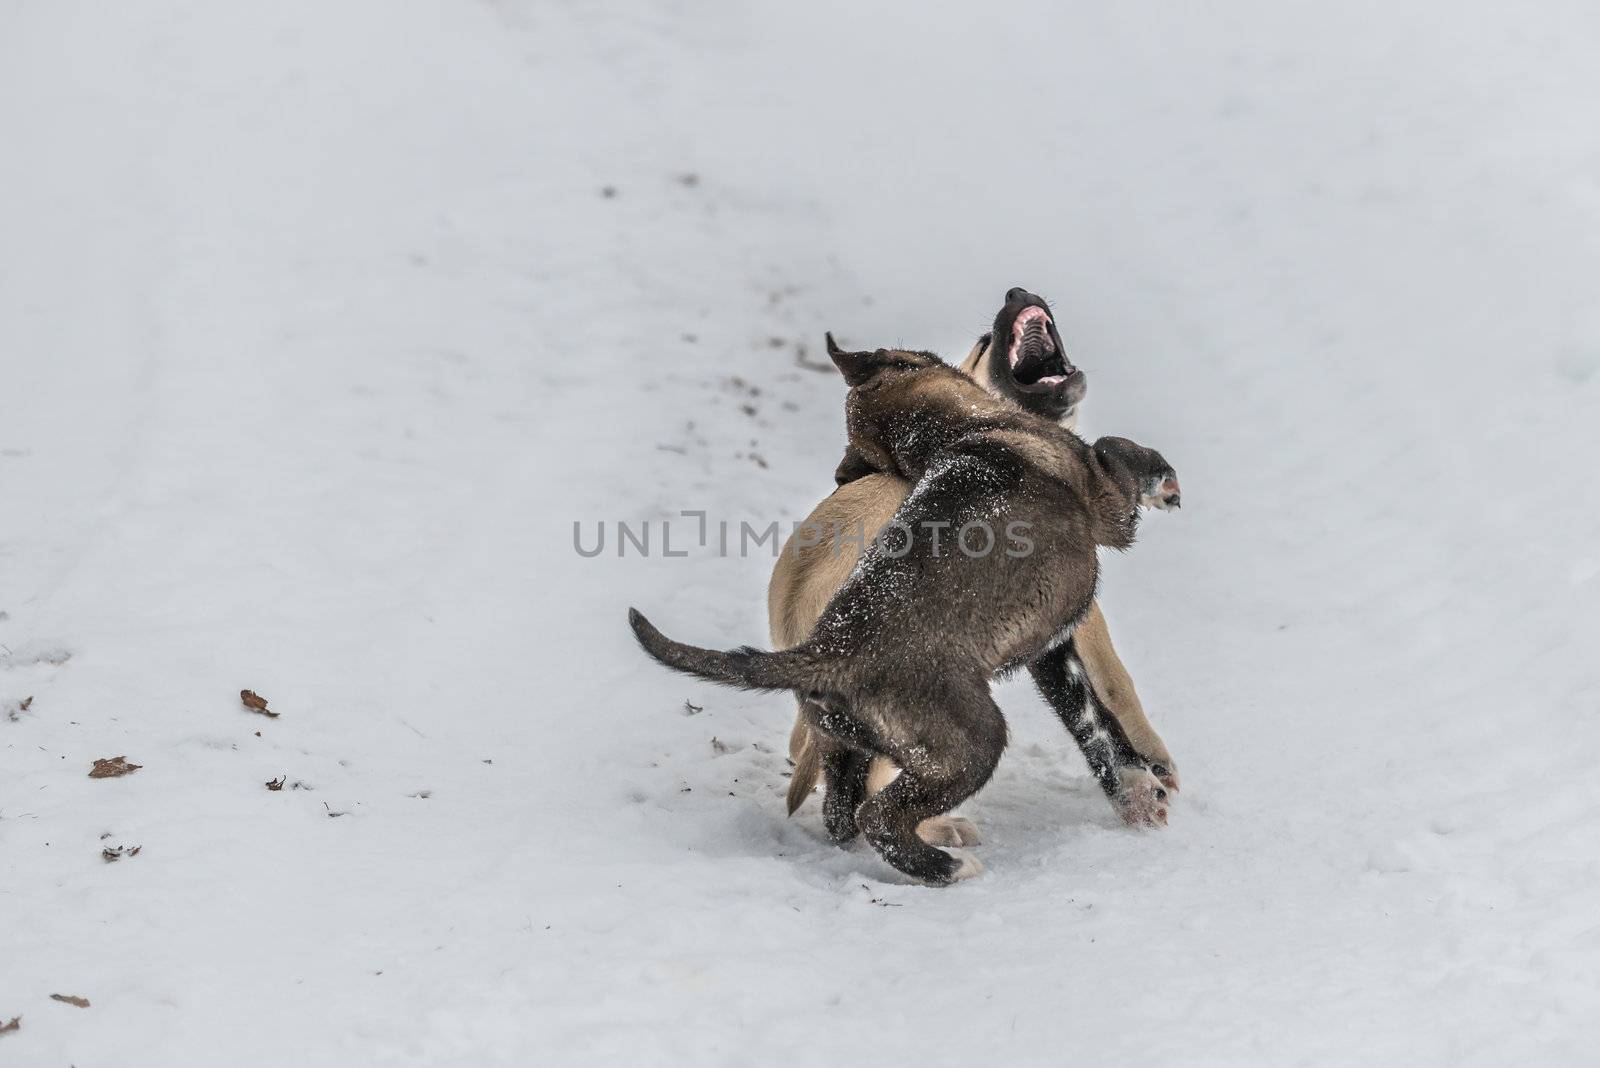 Two cute little dog pups playing and fighting in snow. One has his mouth open, another is biting the other's neck.